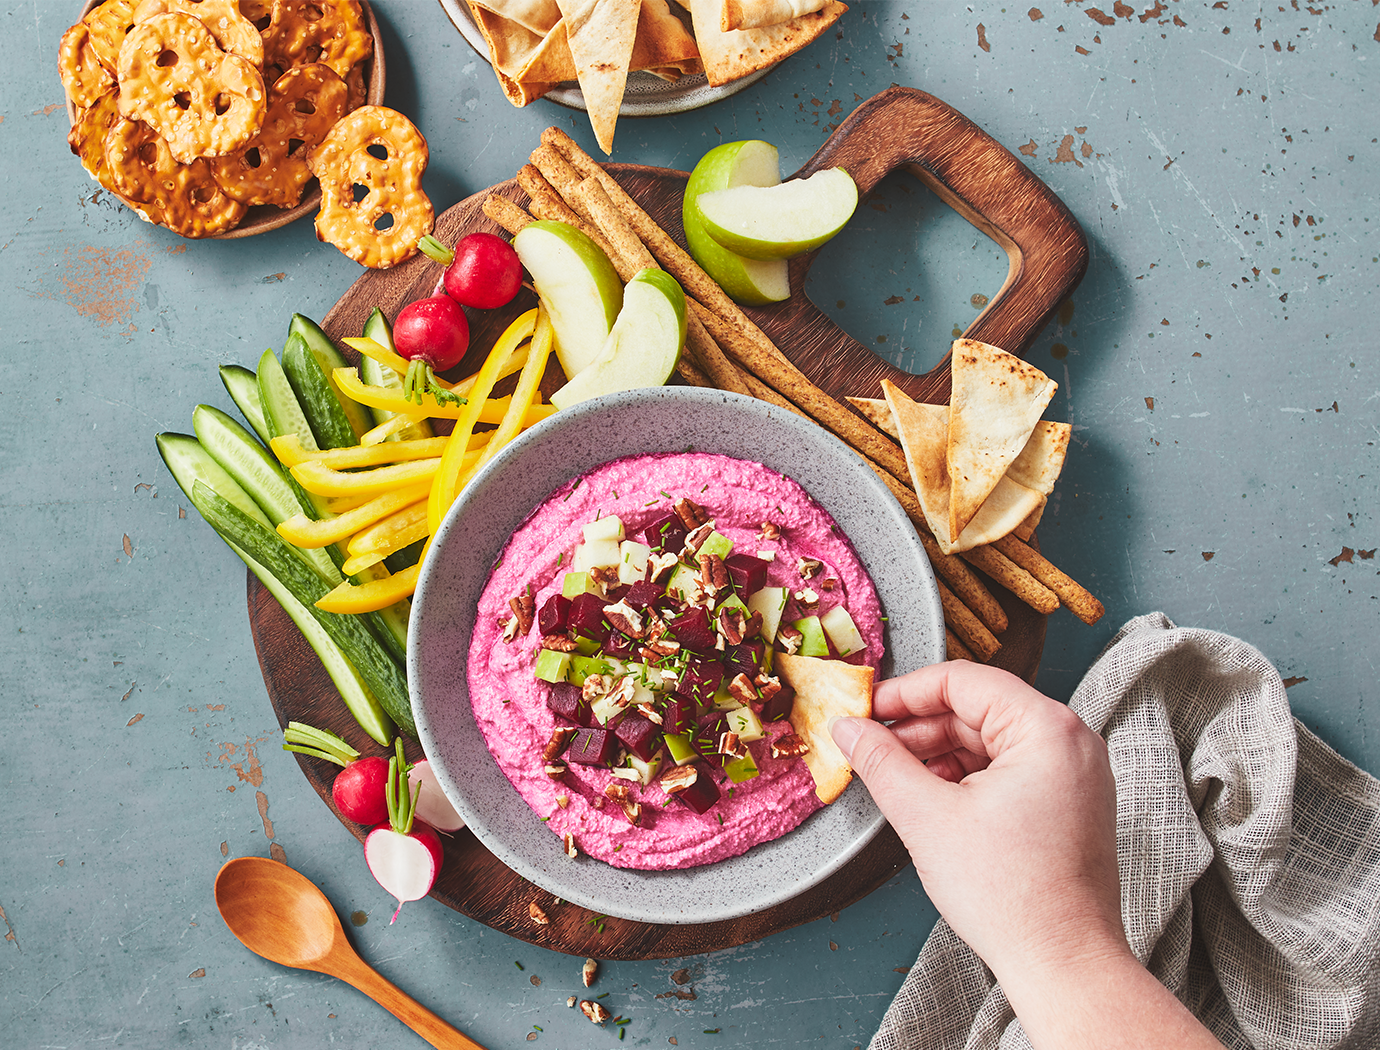 Wipped beet and feta dip